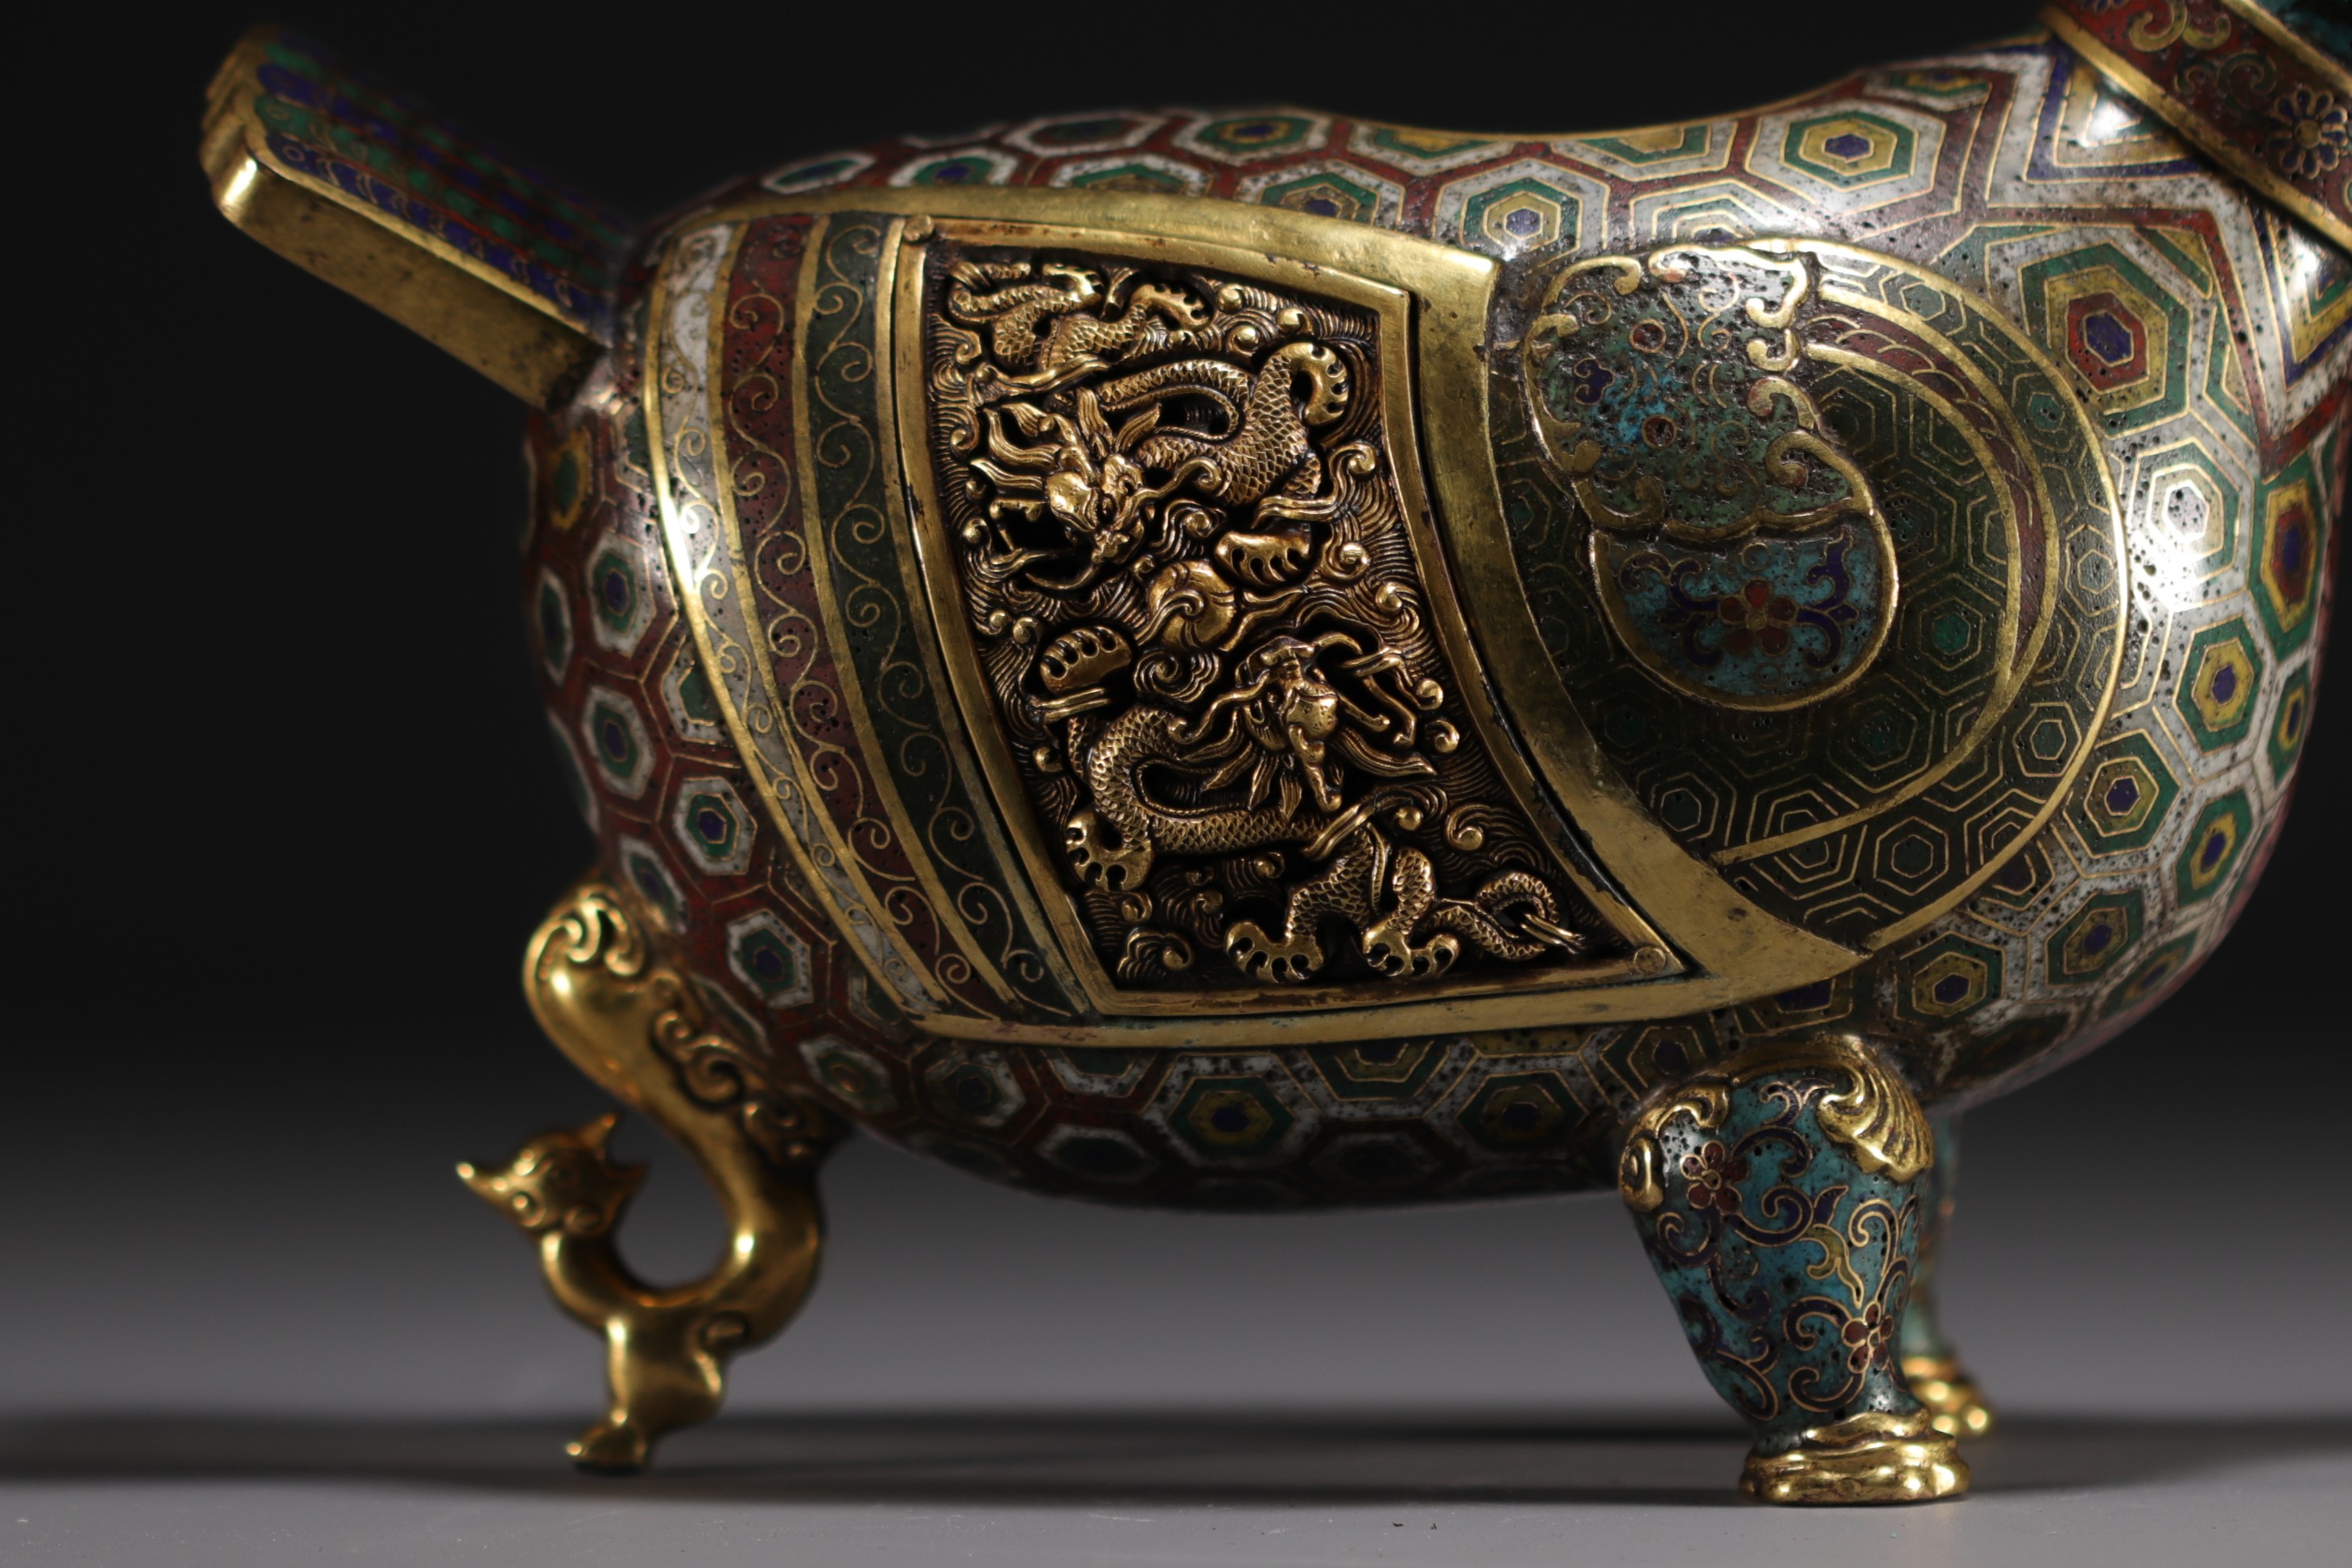 China - Bird-shaped cloisonne bronze perfume burner decorated with dragons, 18th century. - Image 5 of 7